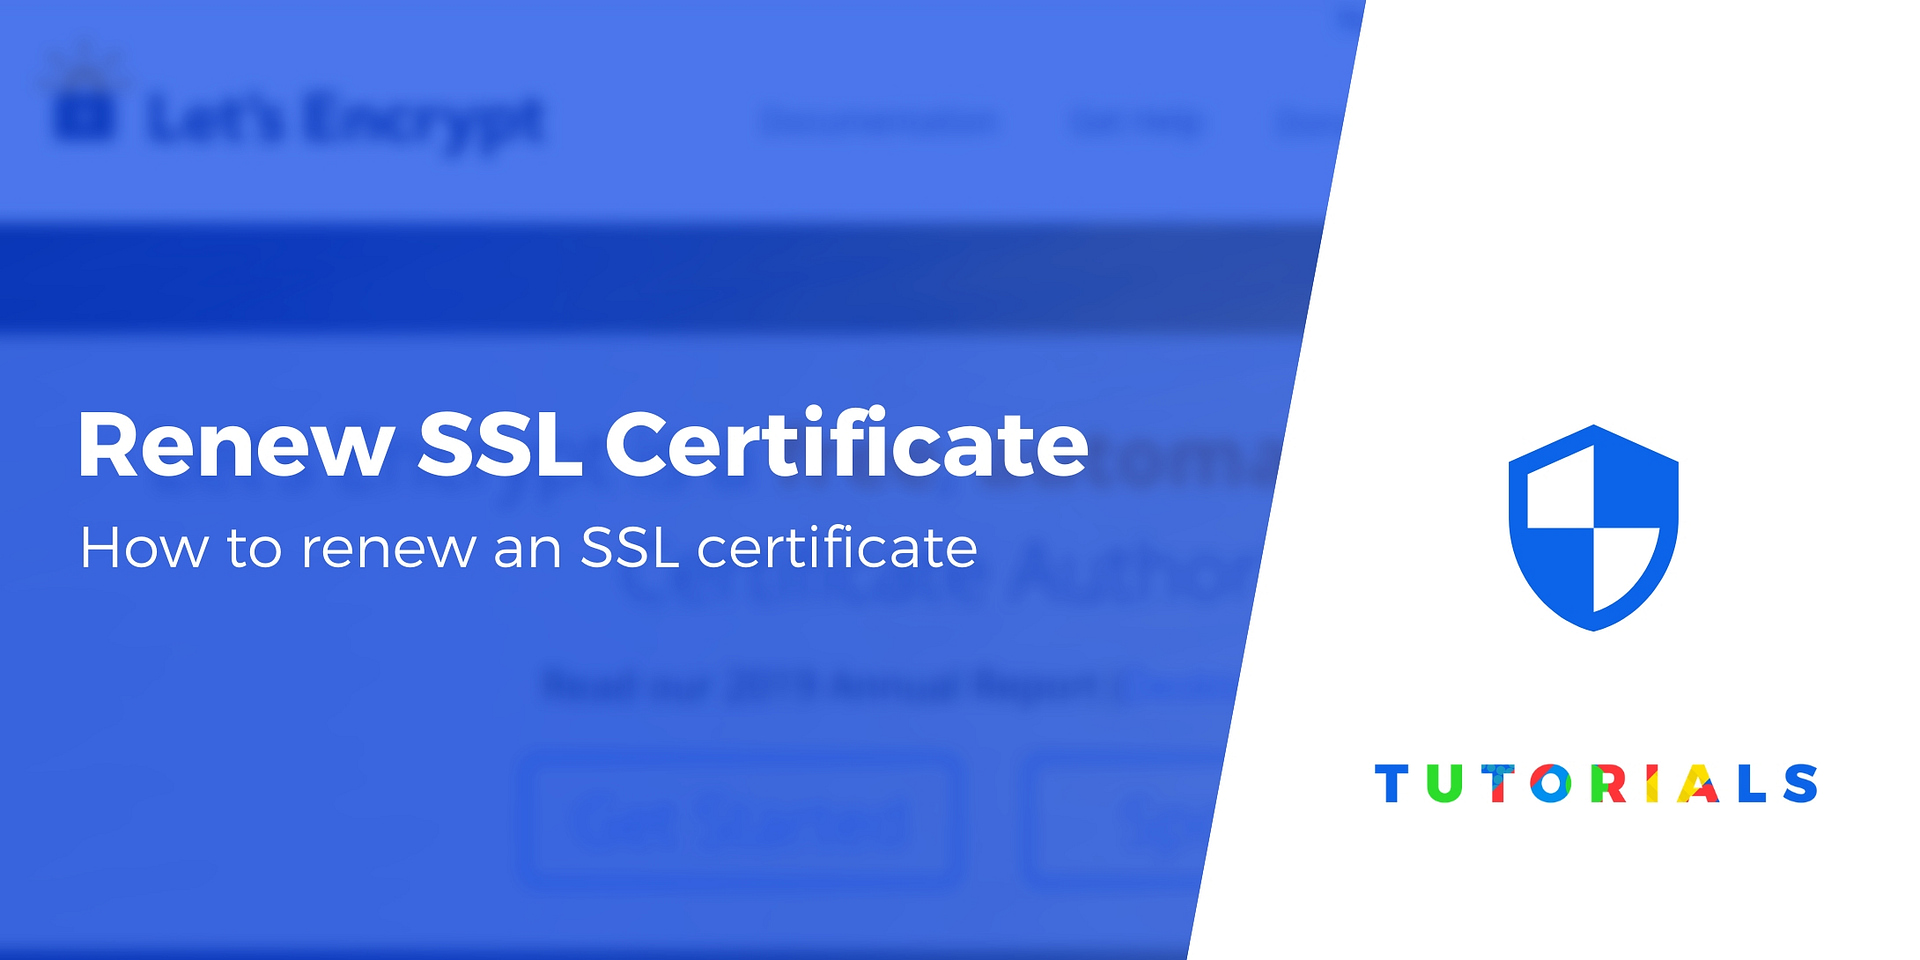 How To Renew Your Ssl Certificate In 4 Simple Steps 2020 Tutorial